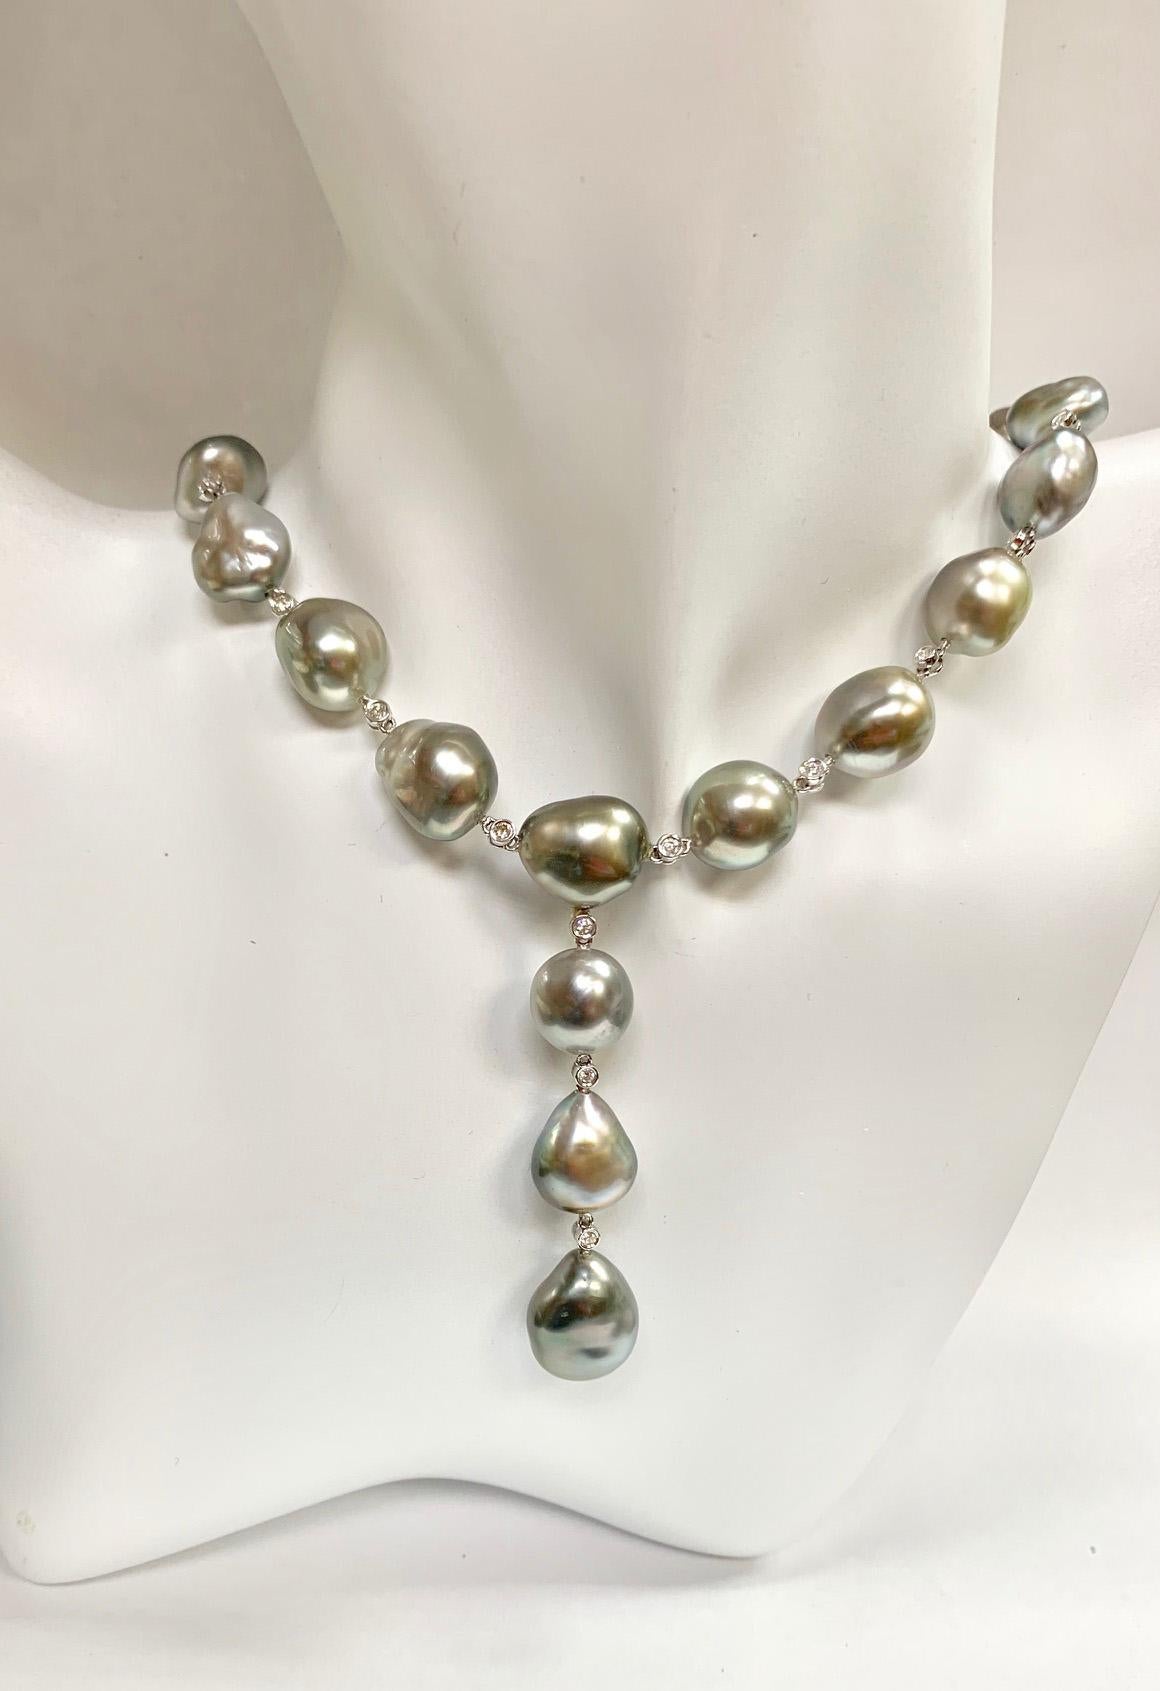 Y Shaped Keshi Pearl Necklace
Pearls: Grey Baroque Keshi Pearls
Stones: 0.74 carat Diamonds
Gold: 18K White Gold